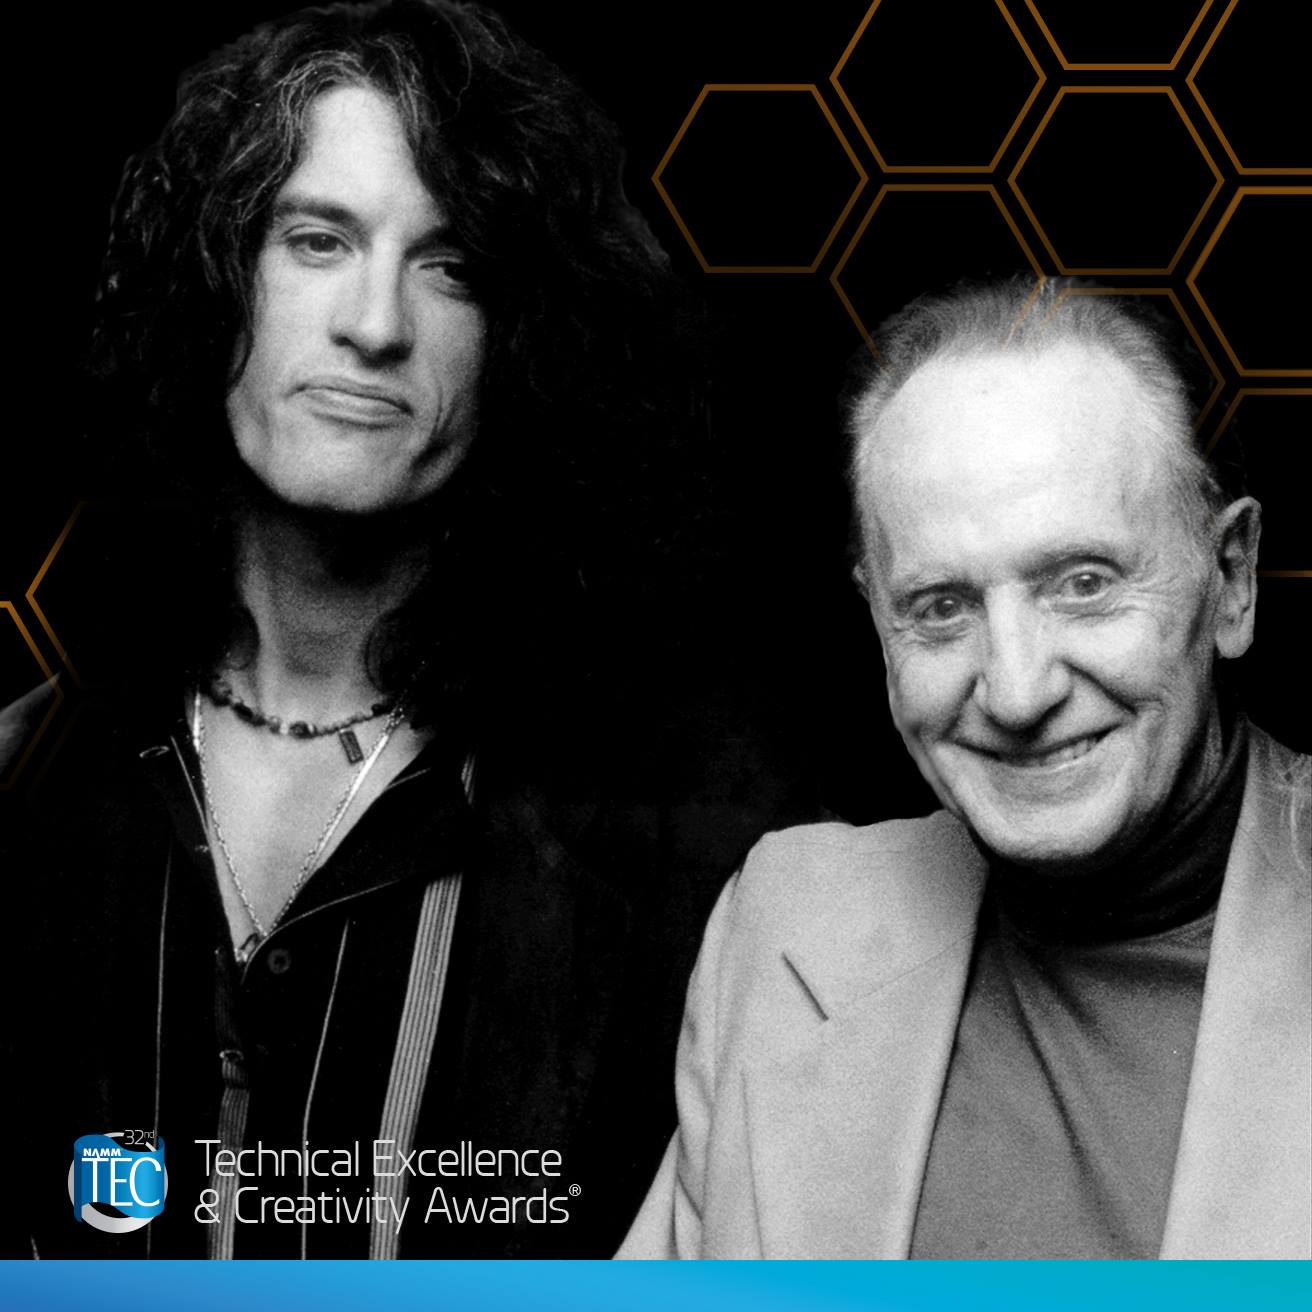 "Anytime my name is mentioned in the same sentence as Les Paul, it's a huge honor," says Perry. (Photo via NAMM)